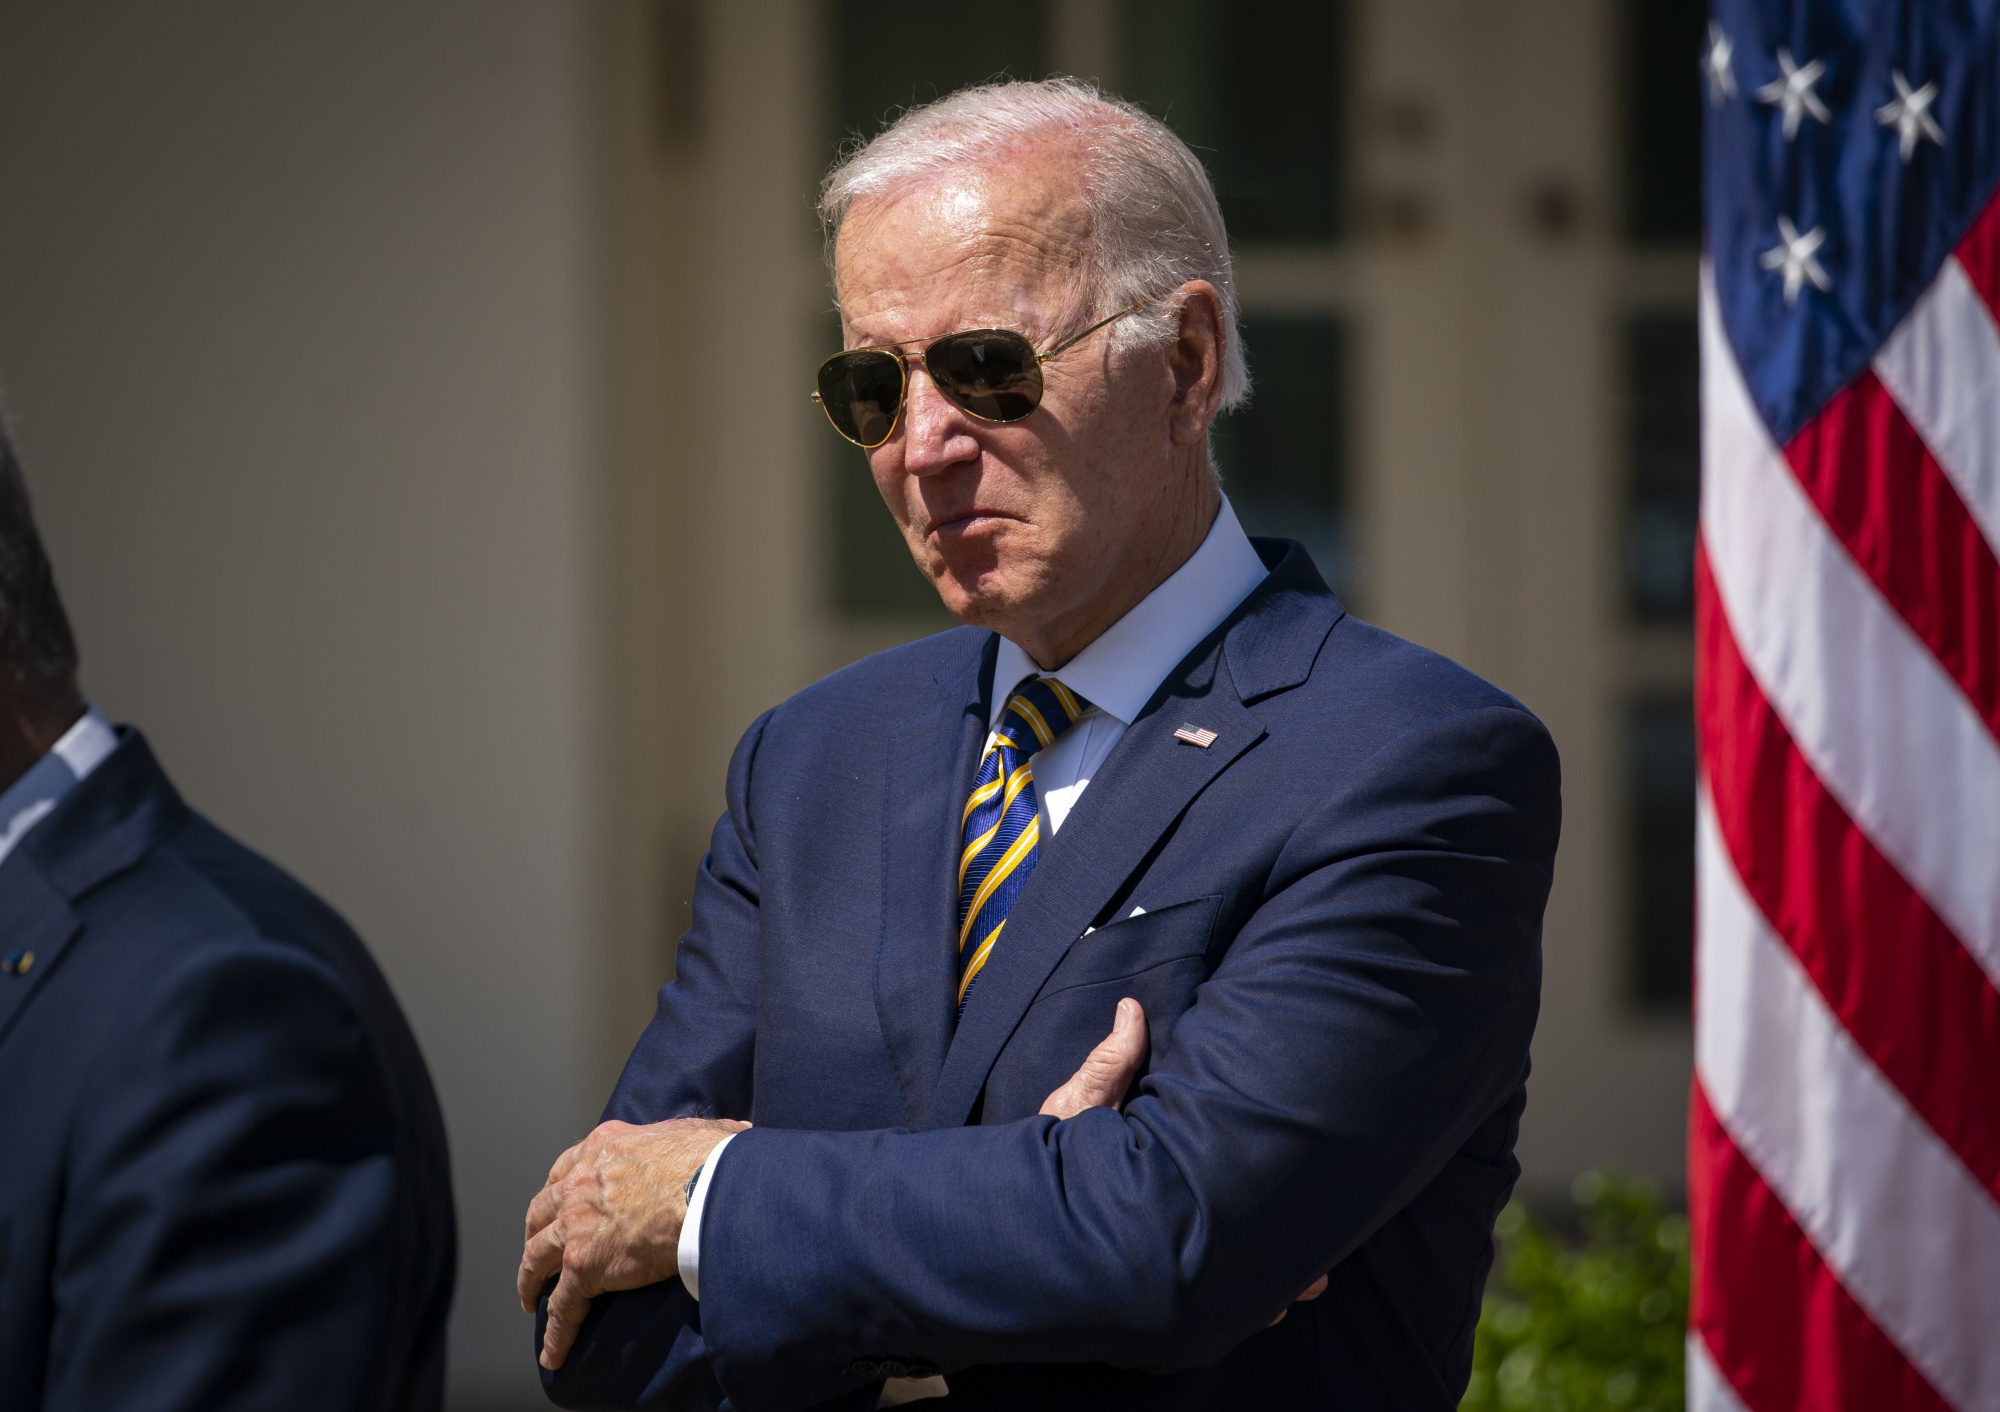 Biden Endorsed Just 2 Primary Candidates. Trump Backed Over - Bloomberg